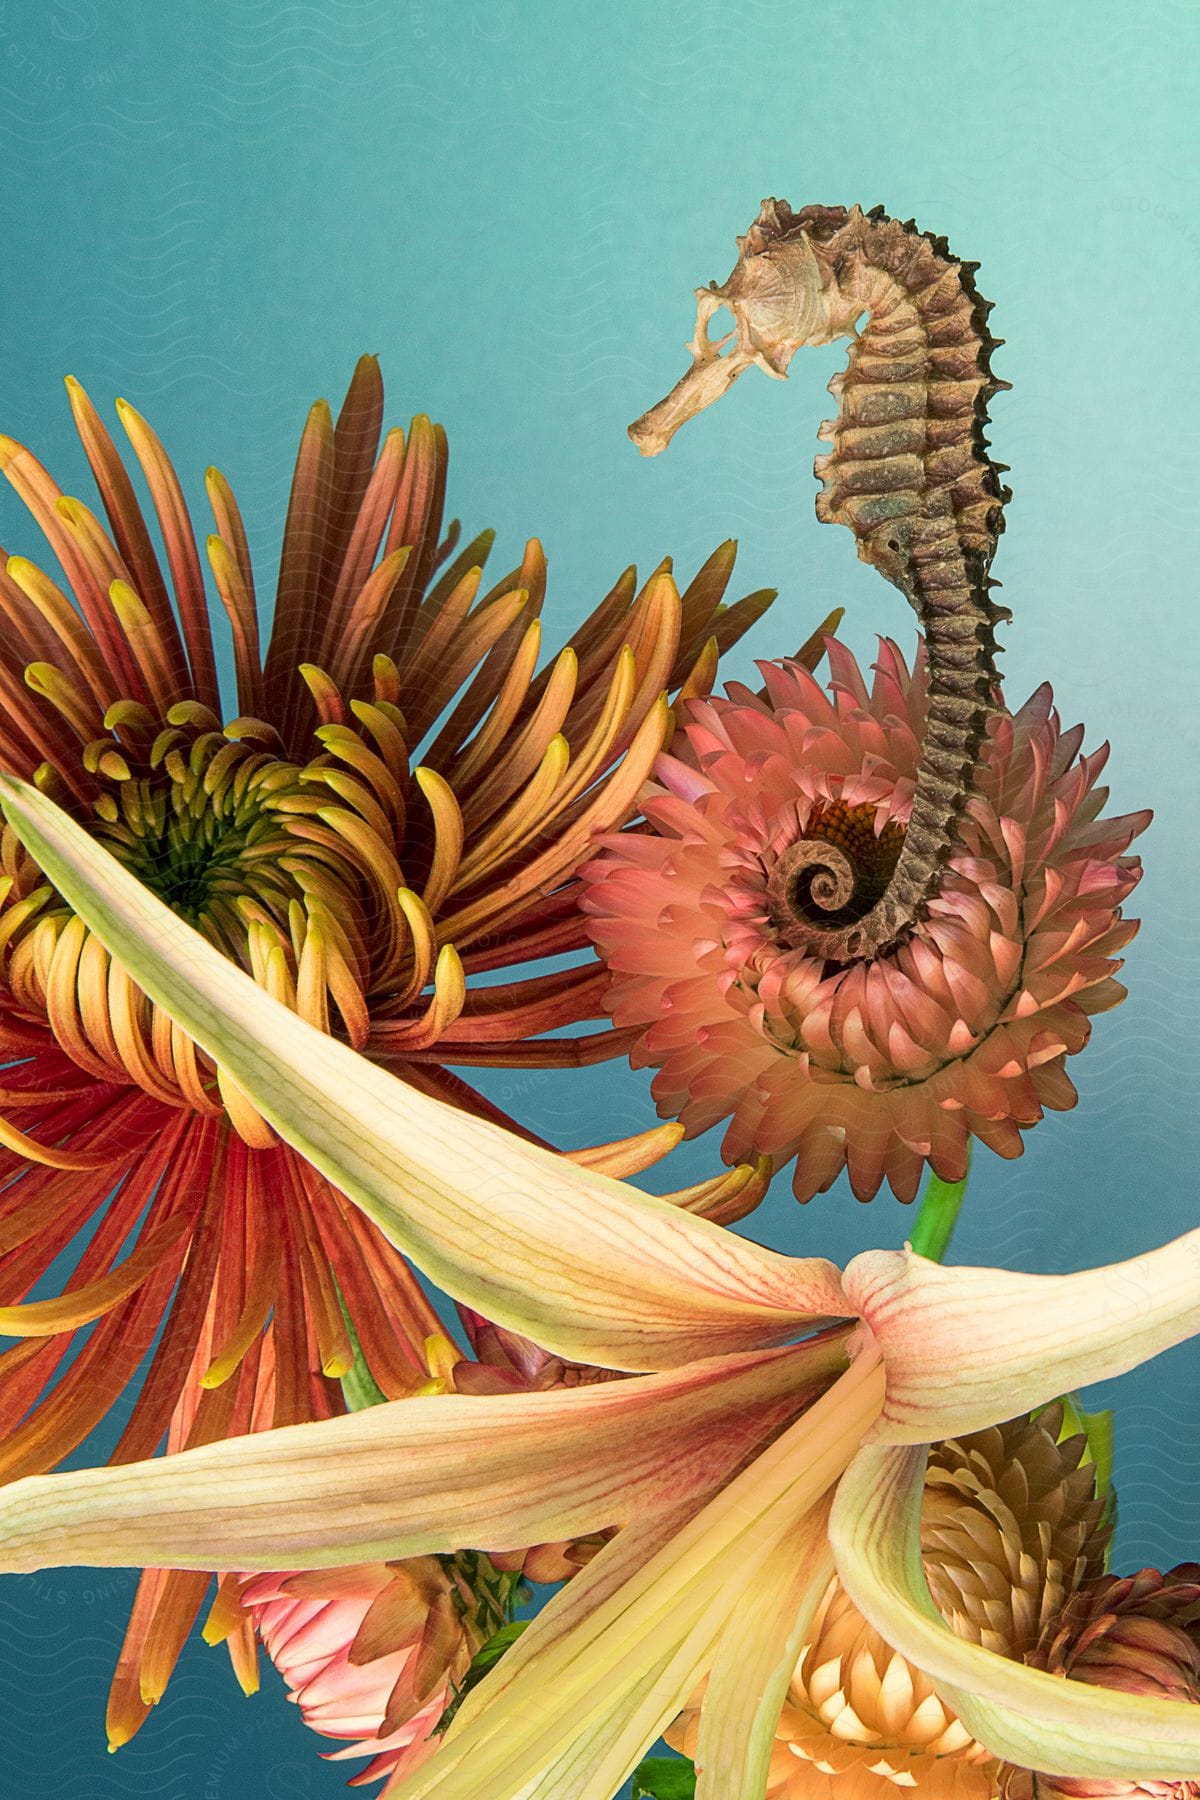 Flowers arranged with a seahorse shell as they spread their petals